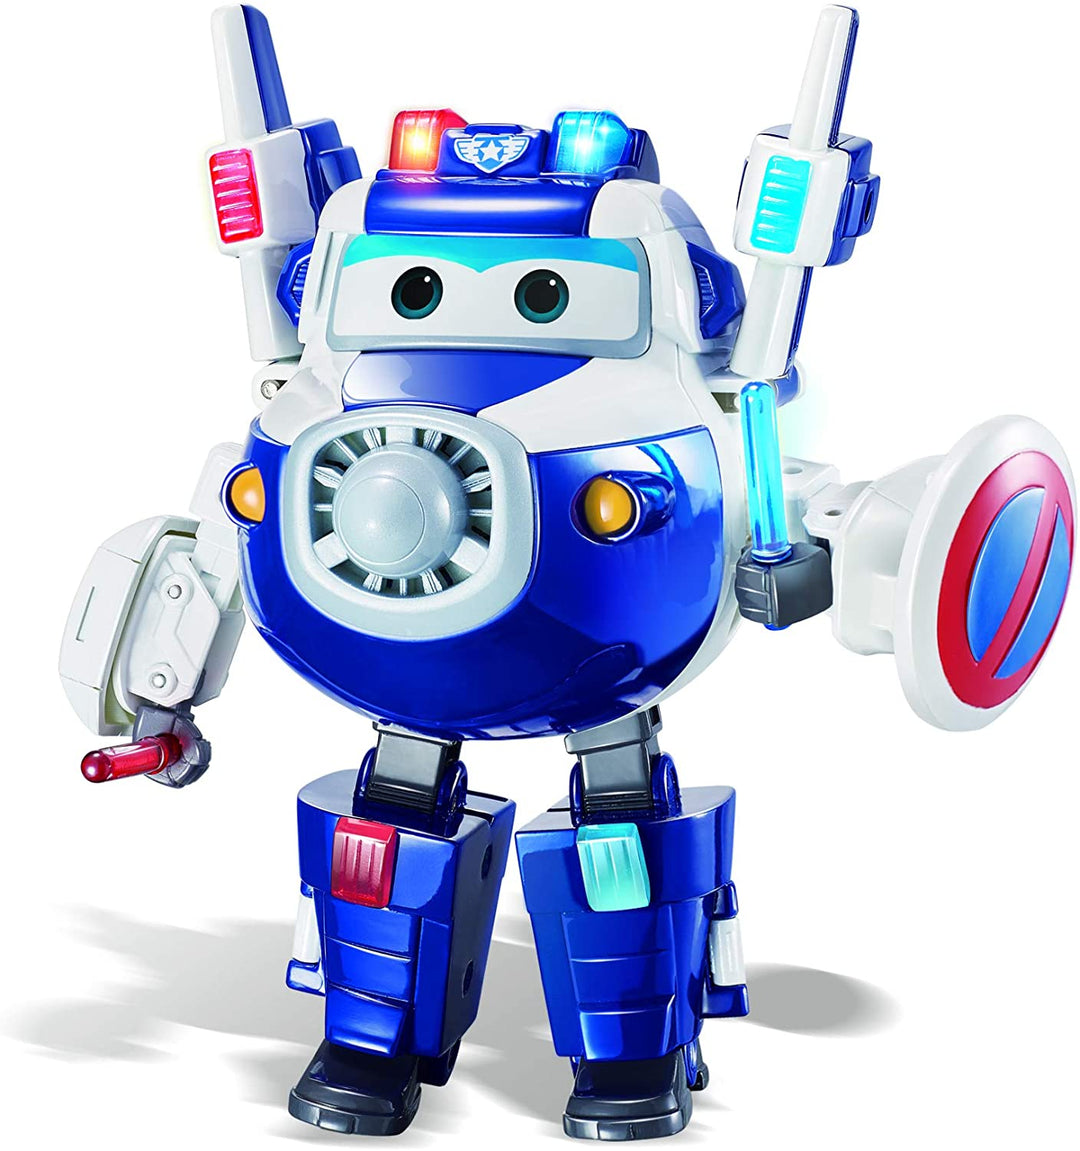 Super Wings EU740925 Paul (Supercharged) Deluxe Transforming Character with Lights and Sounds, Blue